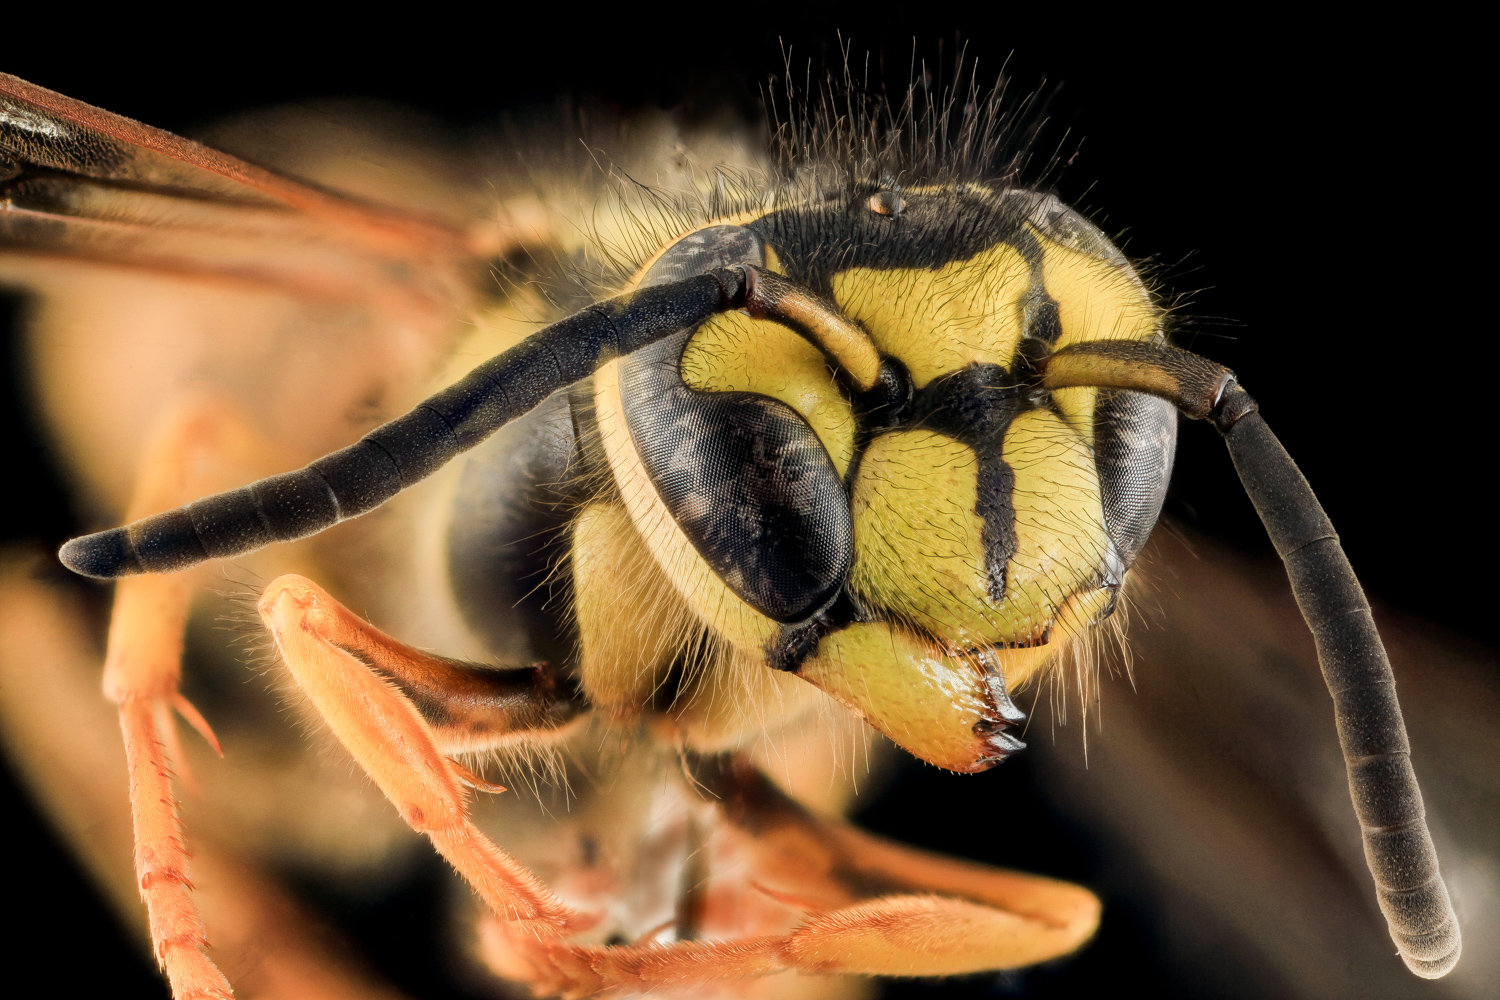 Yellow jackets aren’t bees. Instead, they’re wasps. And when we see them gives us a good idea of what time of year it is.